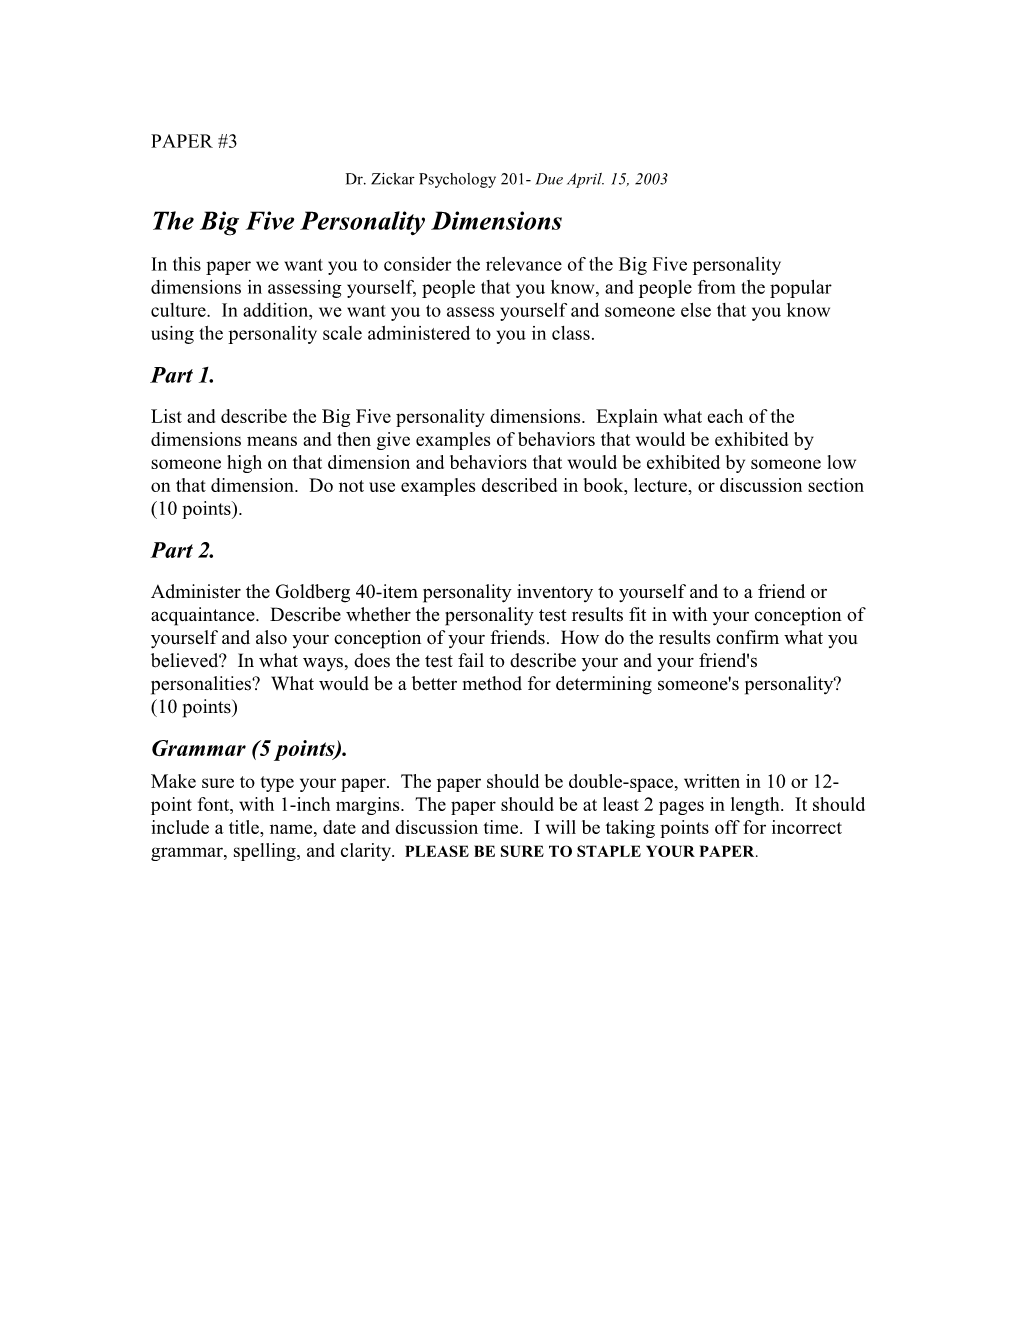 The Big Five Personality Dimensions